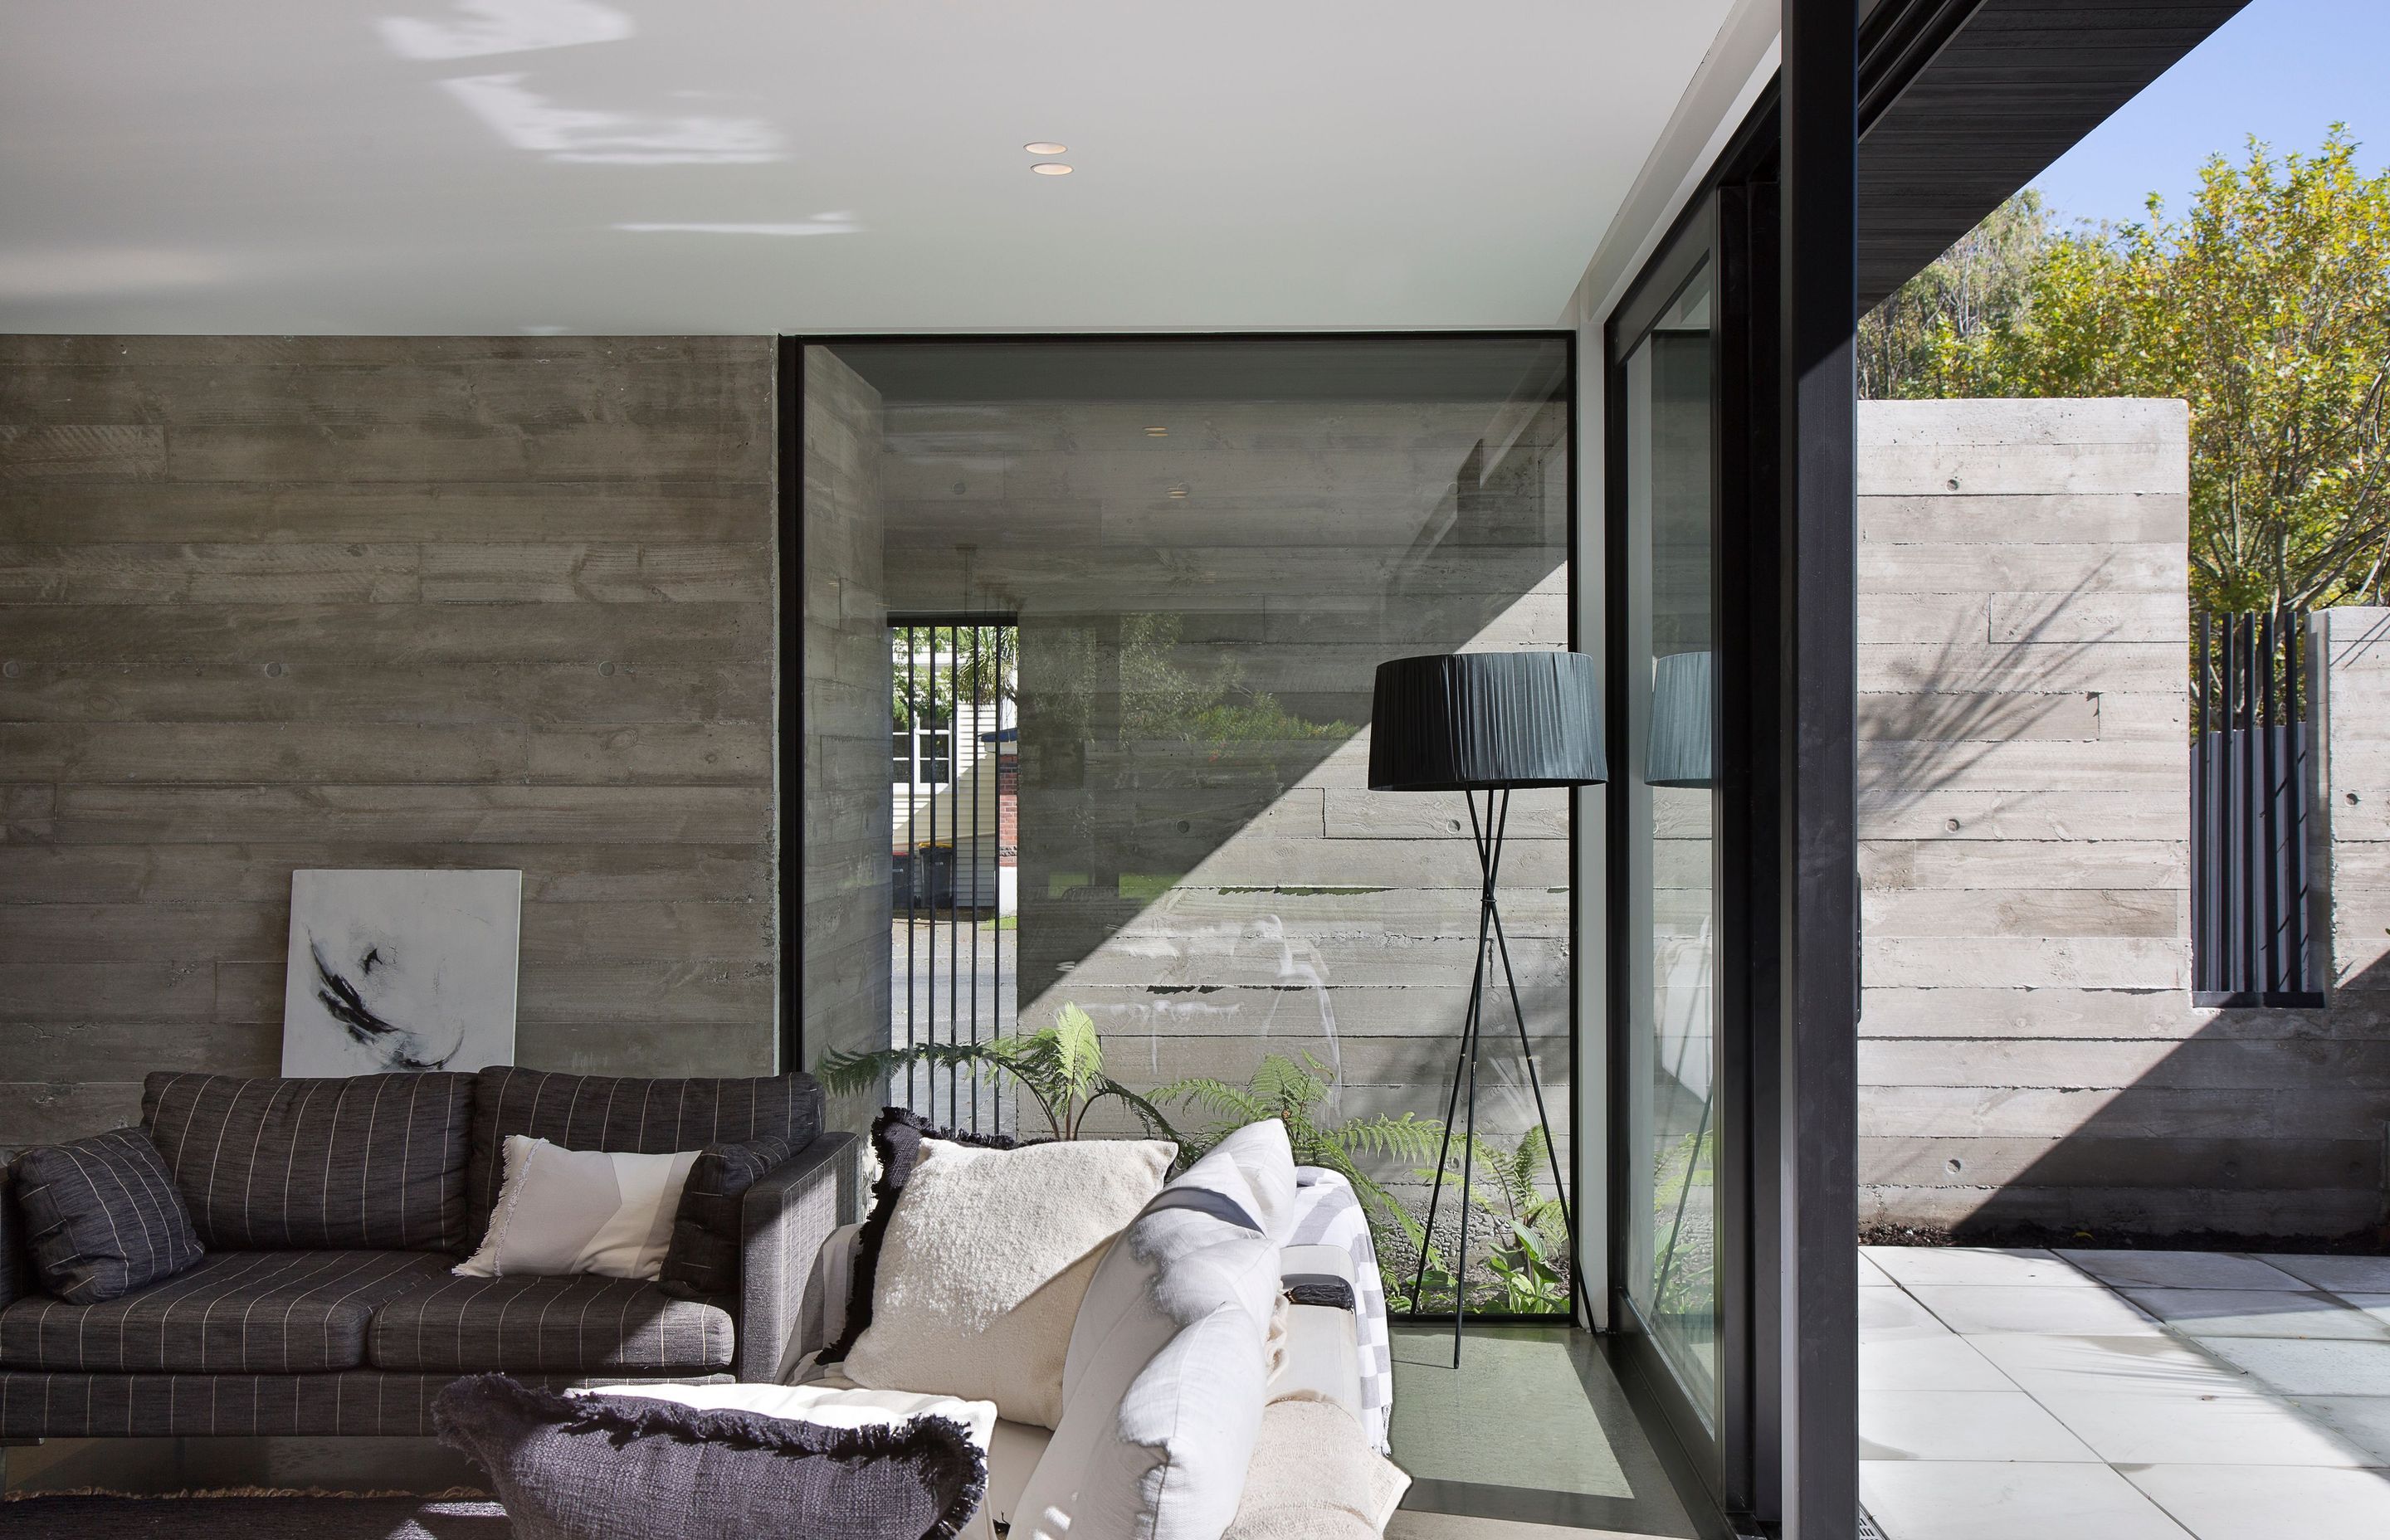 The poured concrete walls are exposed on both sides, providing an interesting texture that also forms part of the internal nature of the house.